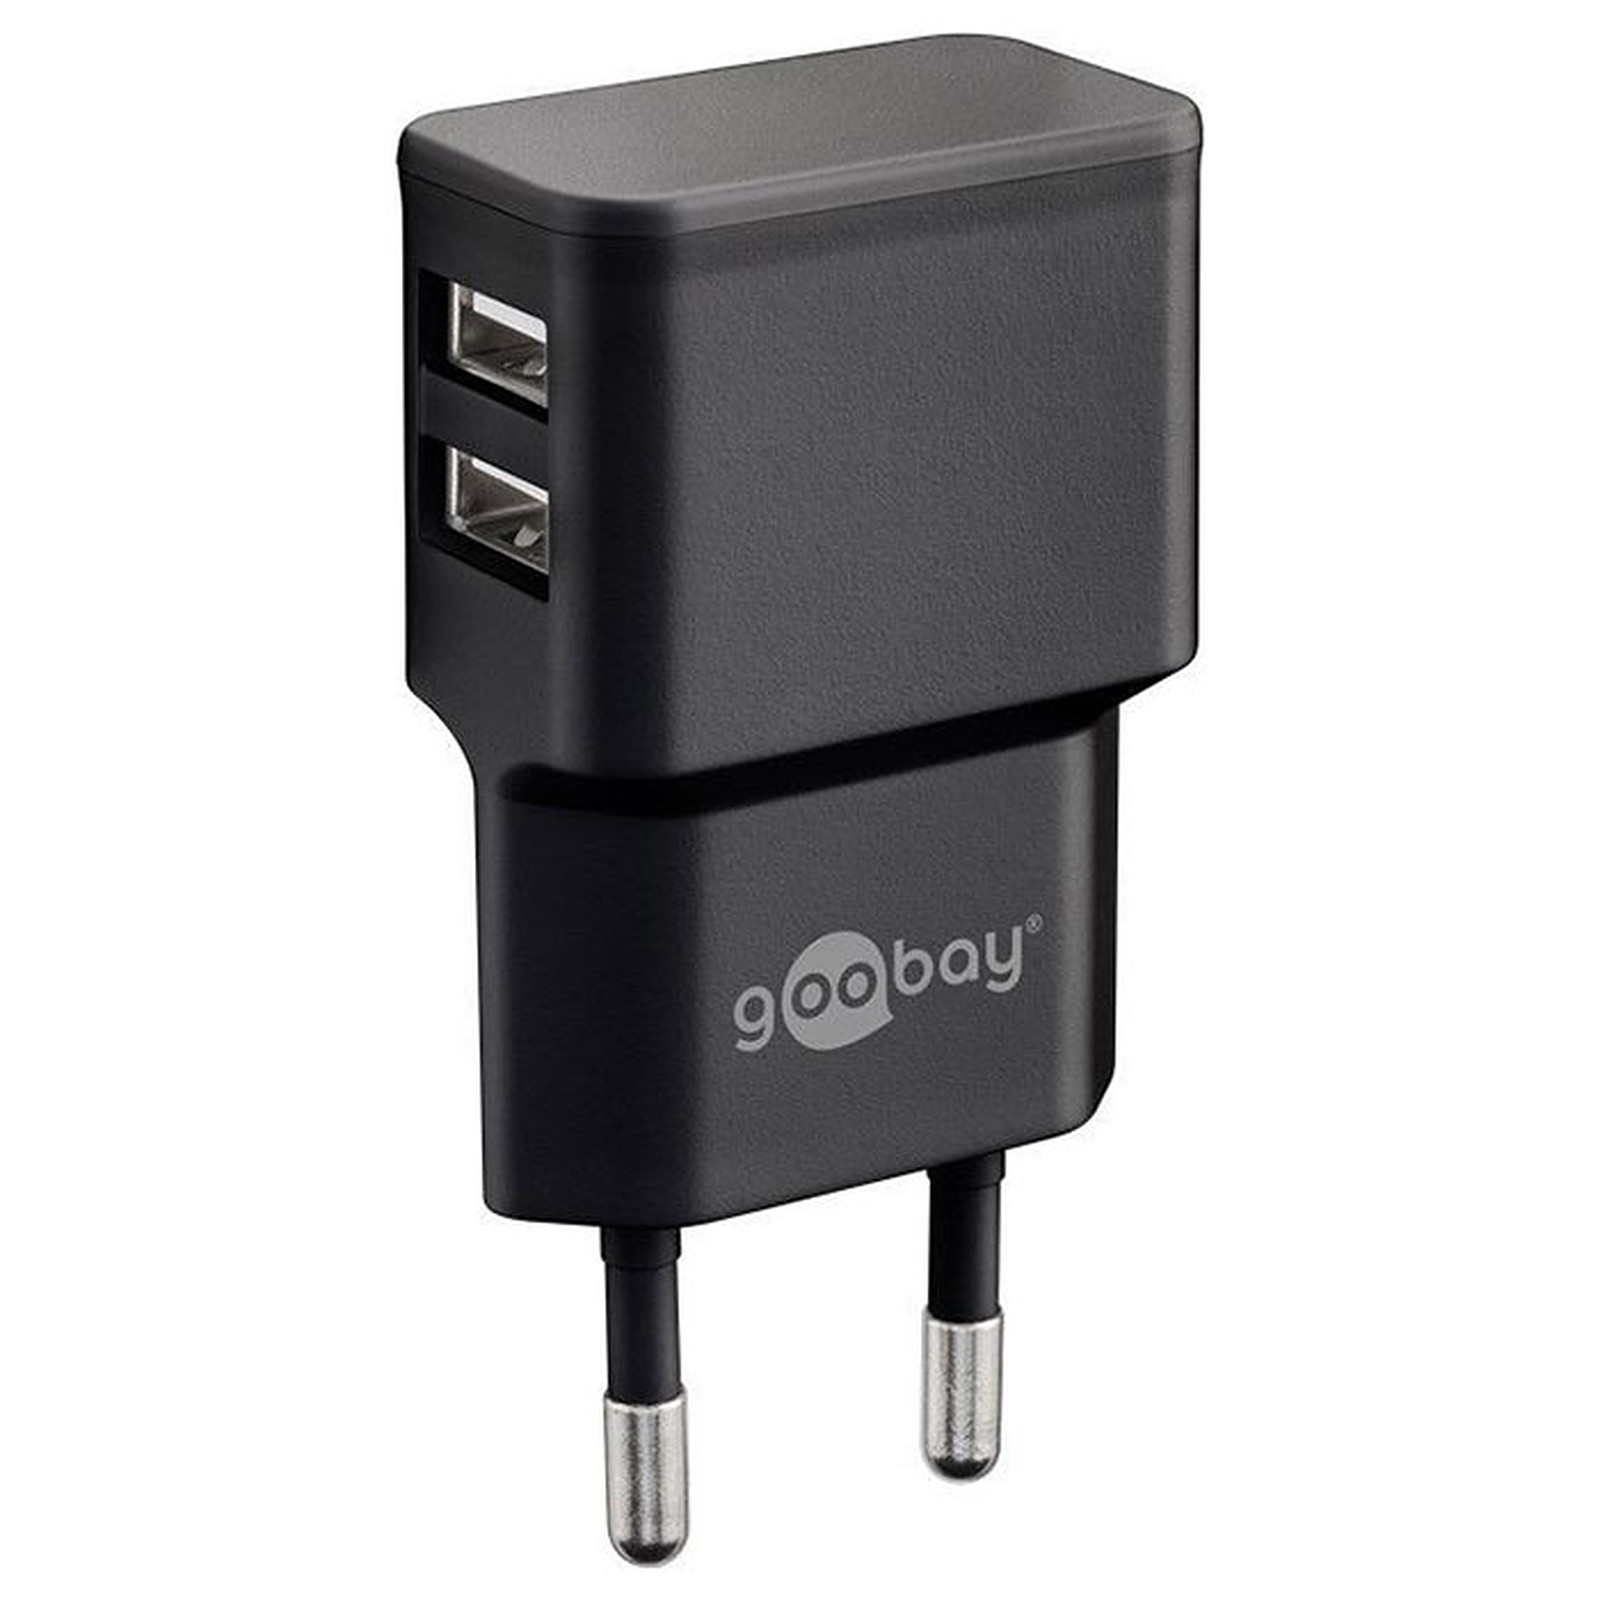 Goobay Chargeur USB Double 2.4A Noir - Chargeur telephone Goobay